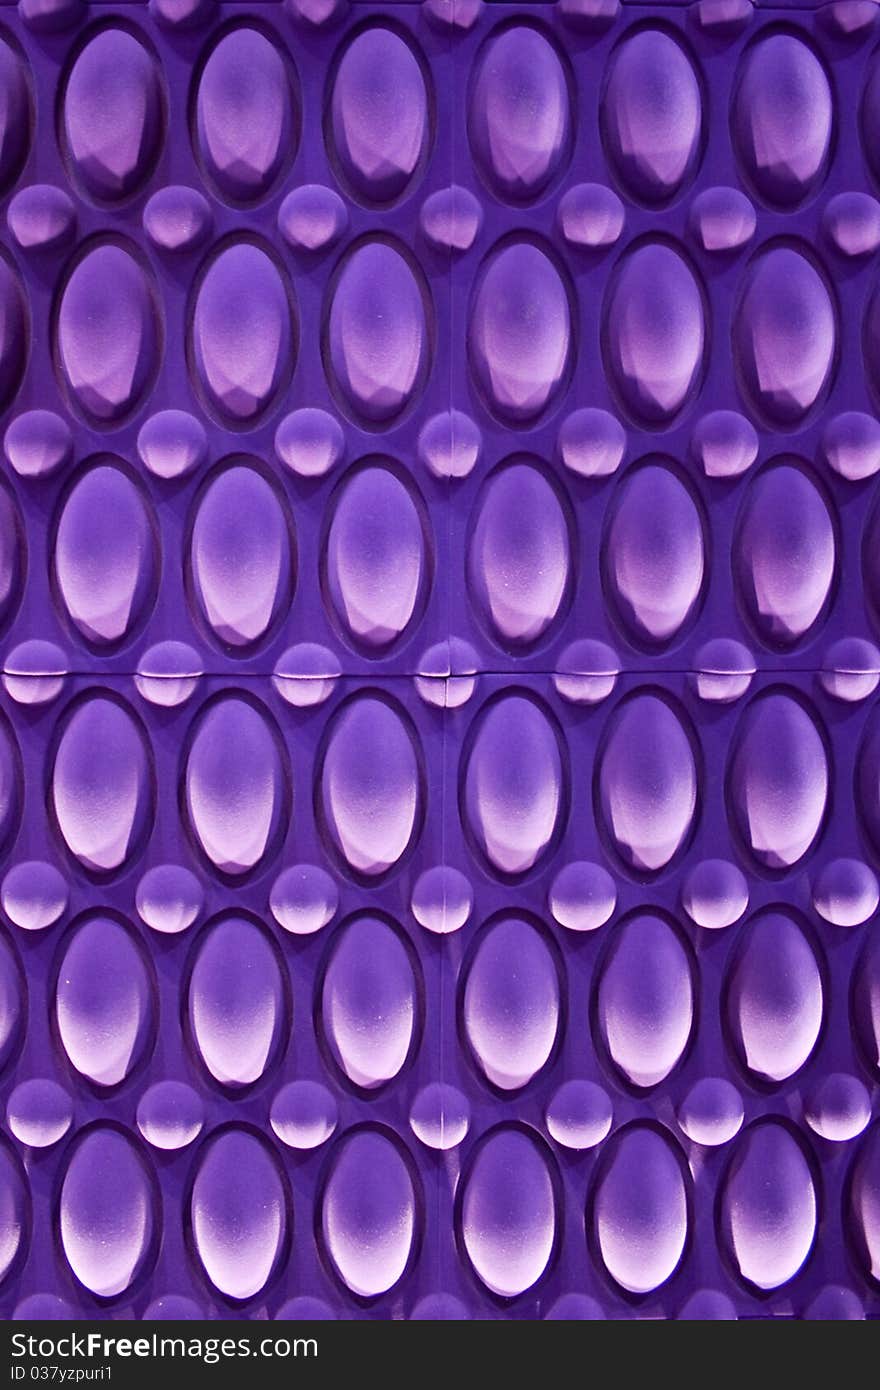 Vivid violet velvet wallpaper abstract design, interior design for modern accommodation,club,lounge or anyplace